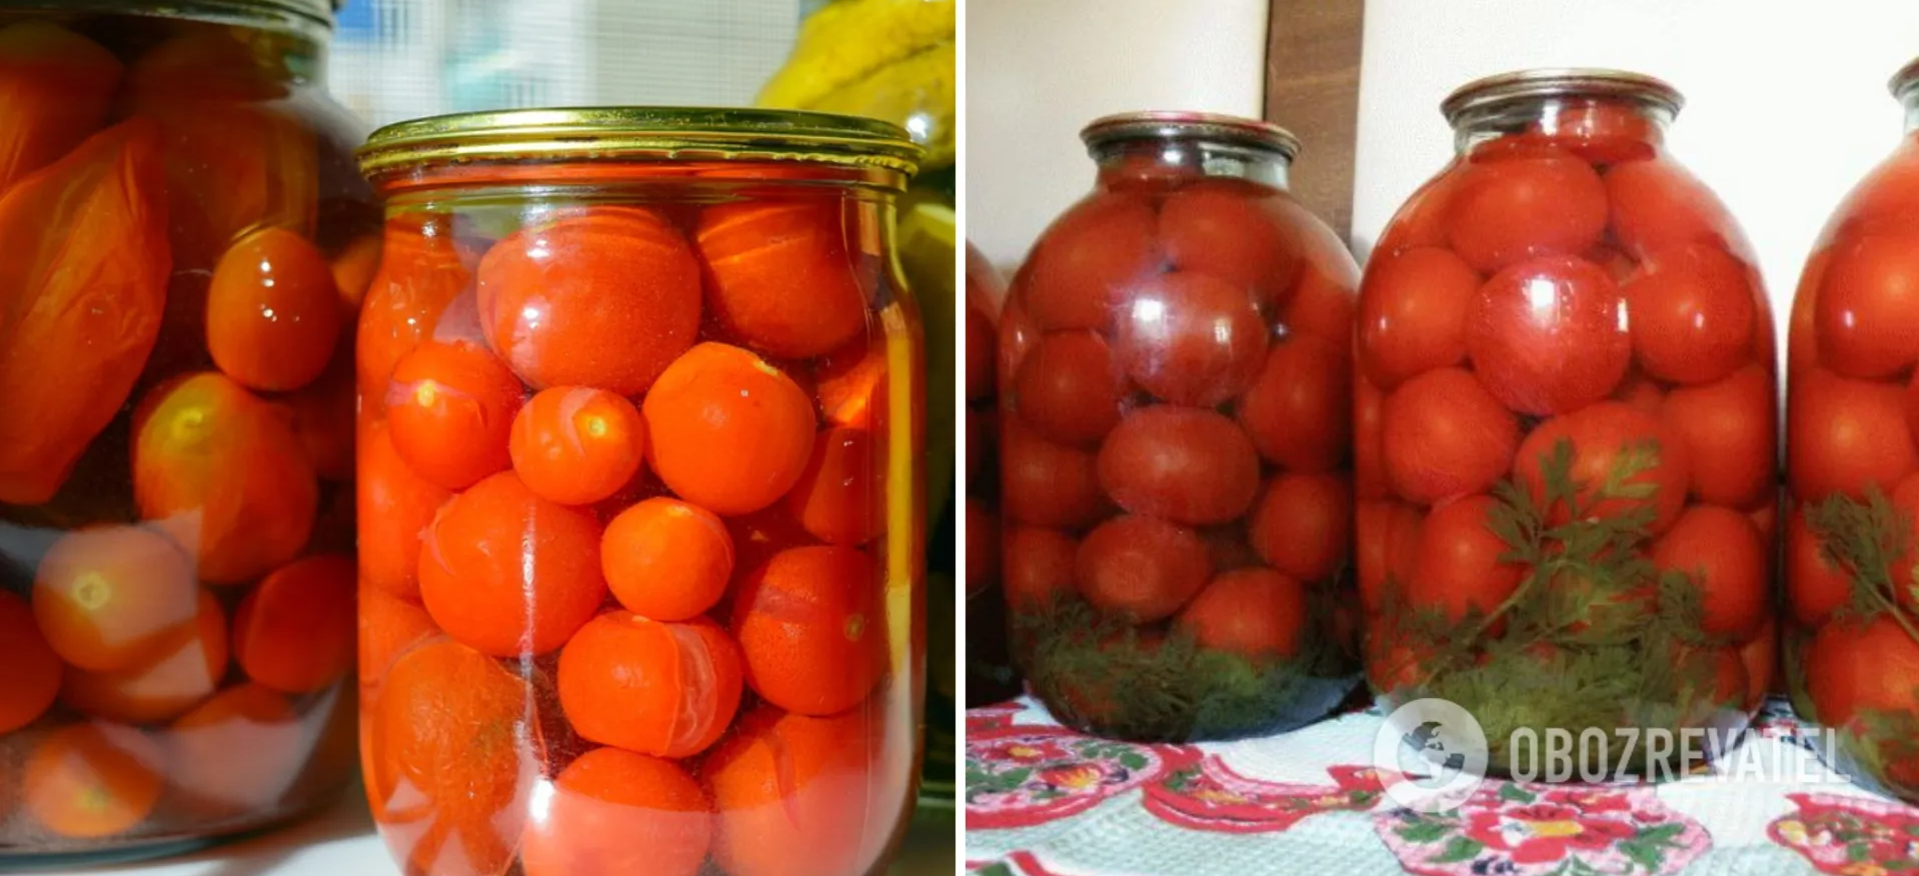 Homemade Sour Tomatoes.